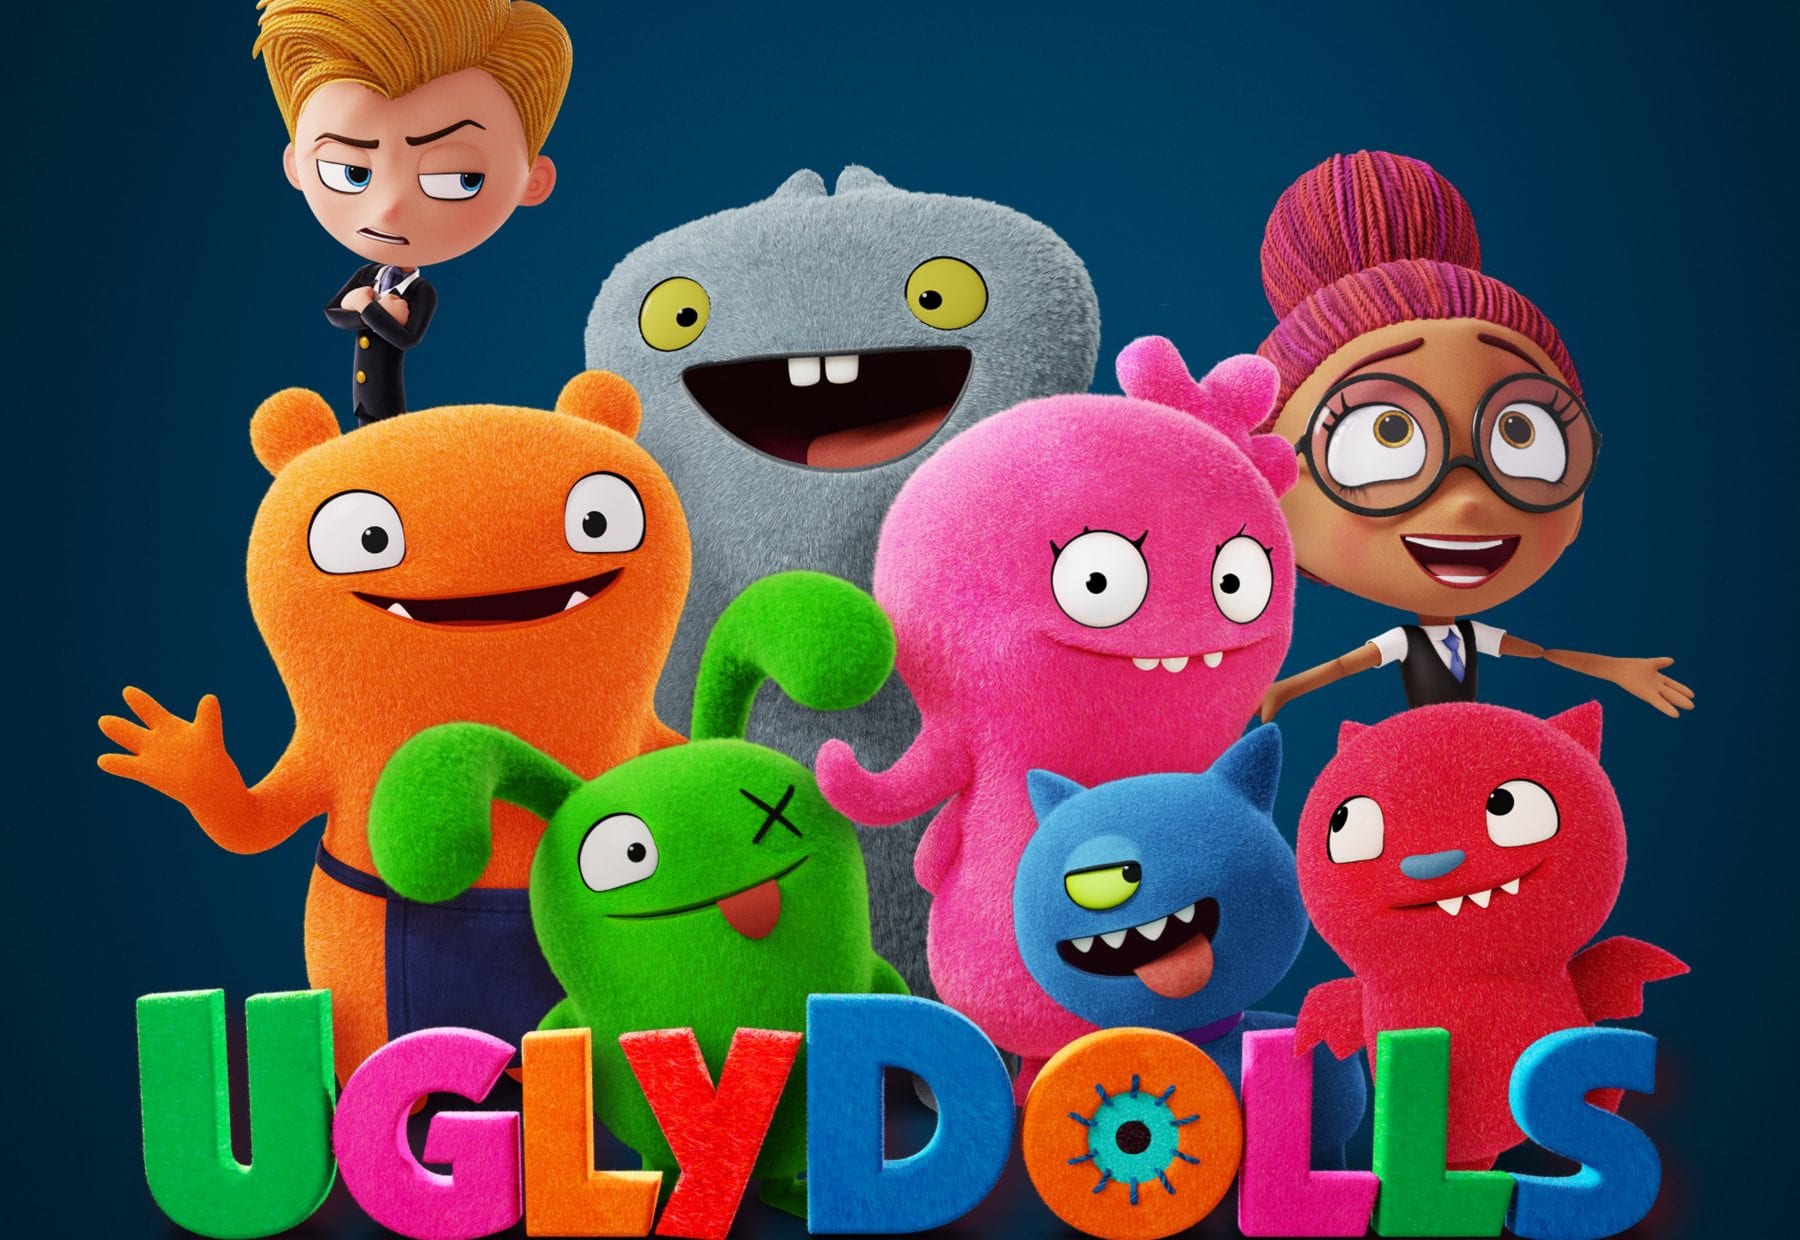 New trailer and posters for animated musical adventure UglyDolls